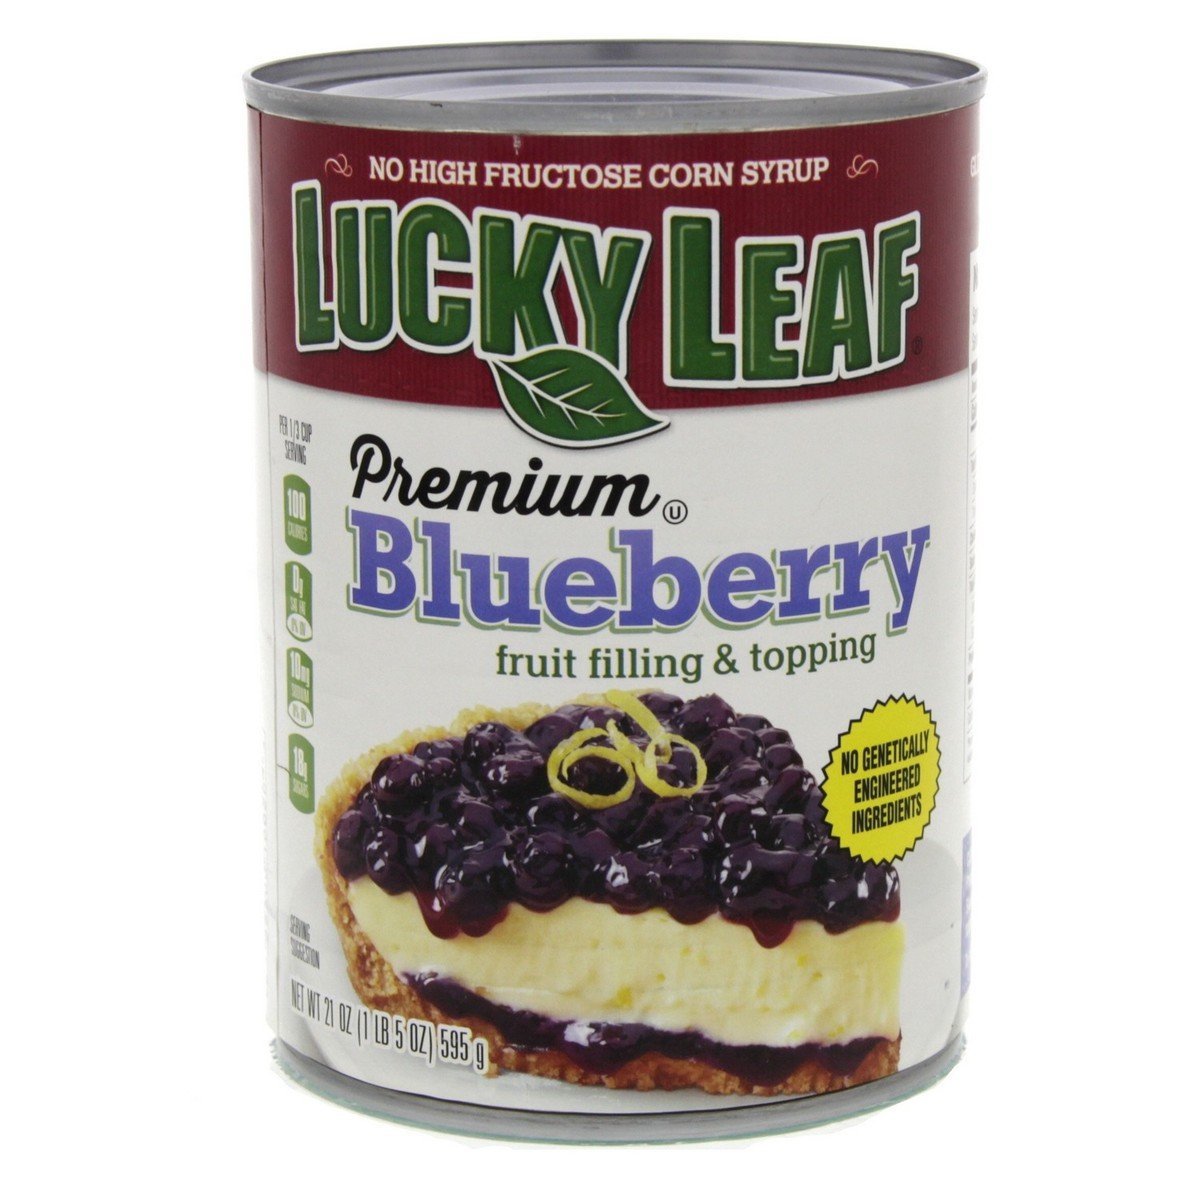 Lucky Leaf Premium Blueberry Fruit Filling & Topping 595 g